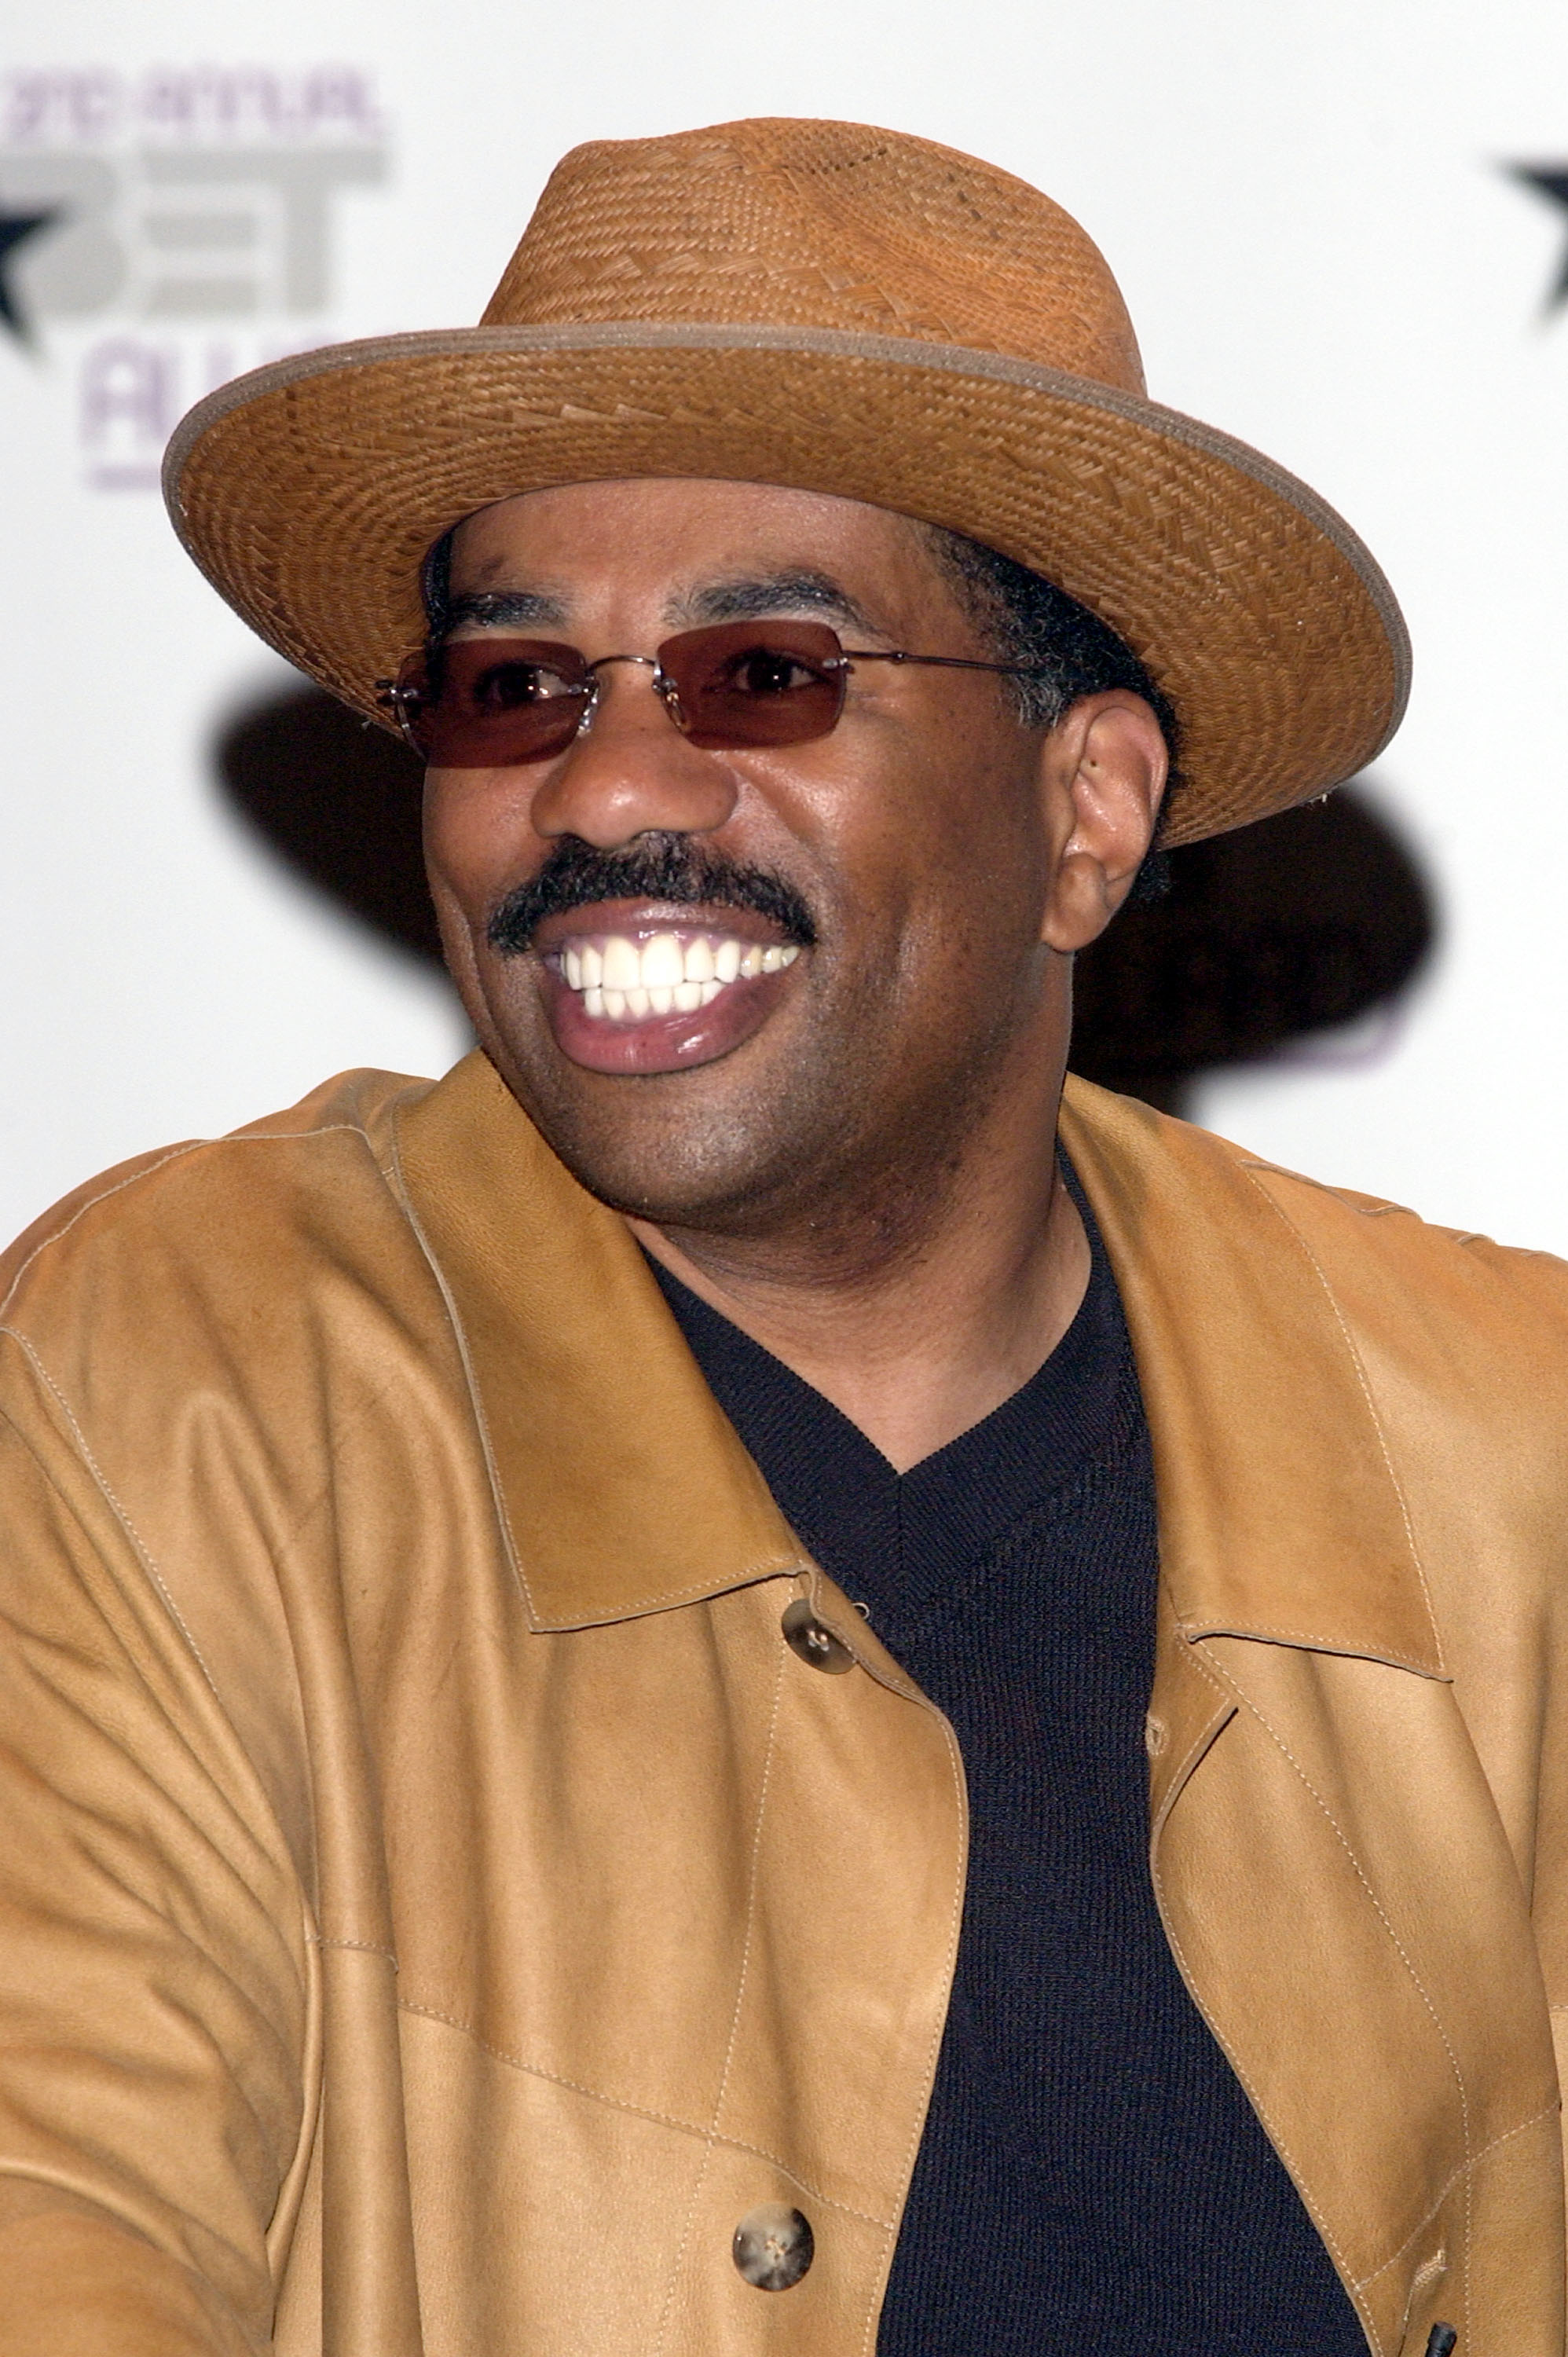 Steve Harvey at the 2nd Annual BET Awards nominations in Hollywood, California on May 14, 2002 | Source: Getty Images